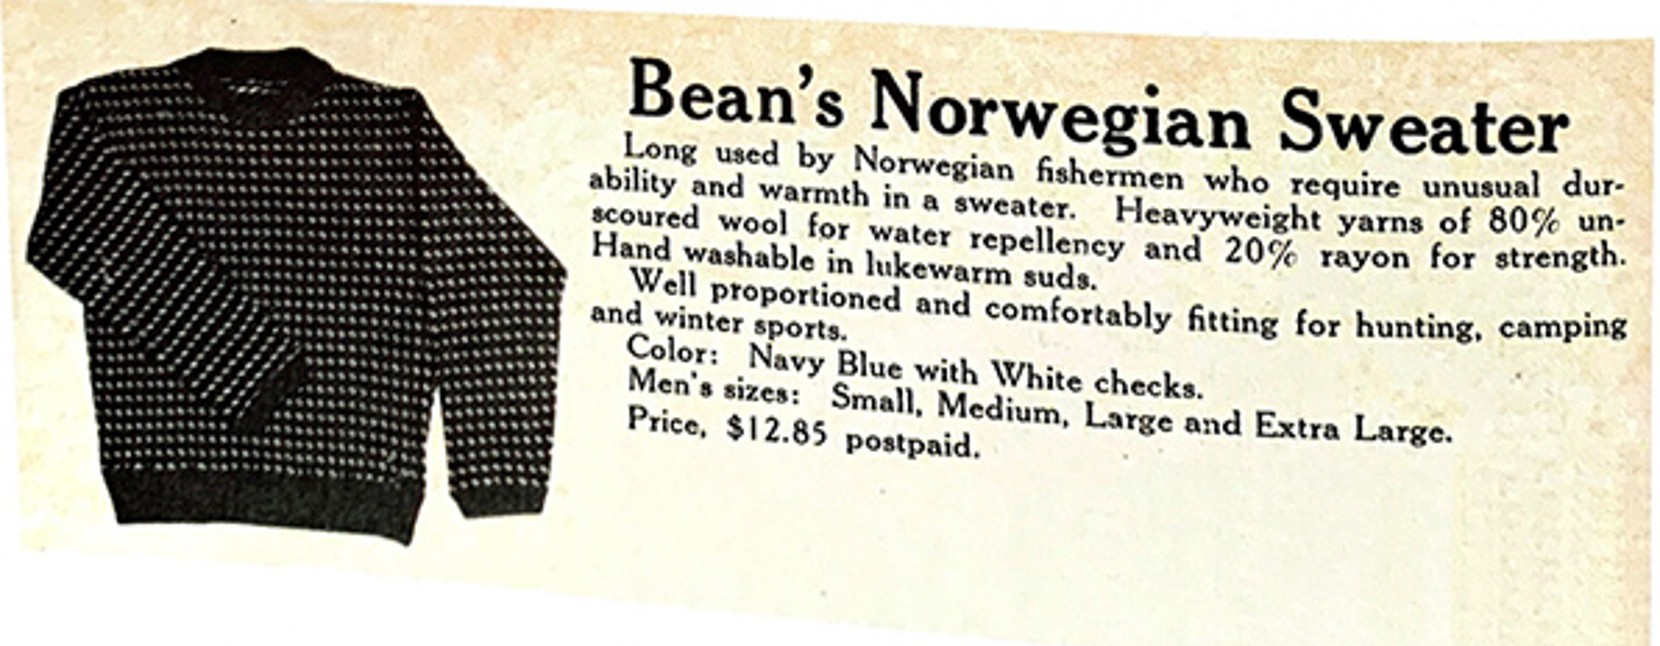 Old L.L.Bean catalog advertisments for Norwegian Sweater